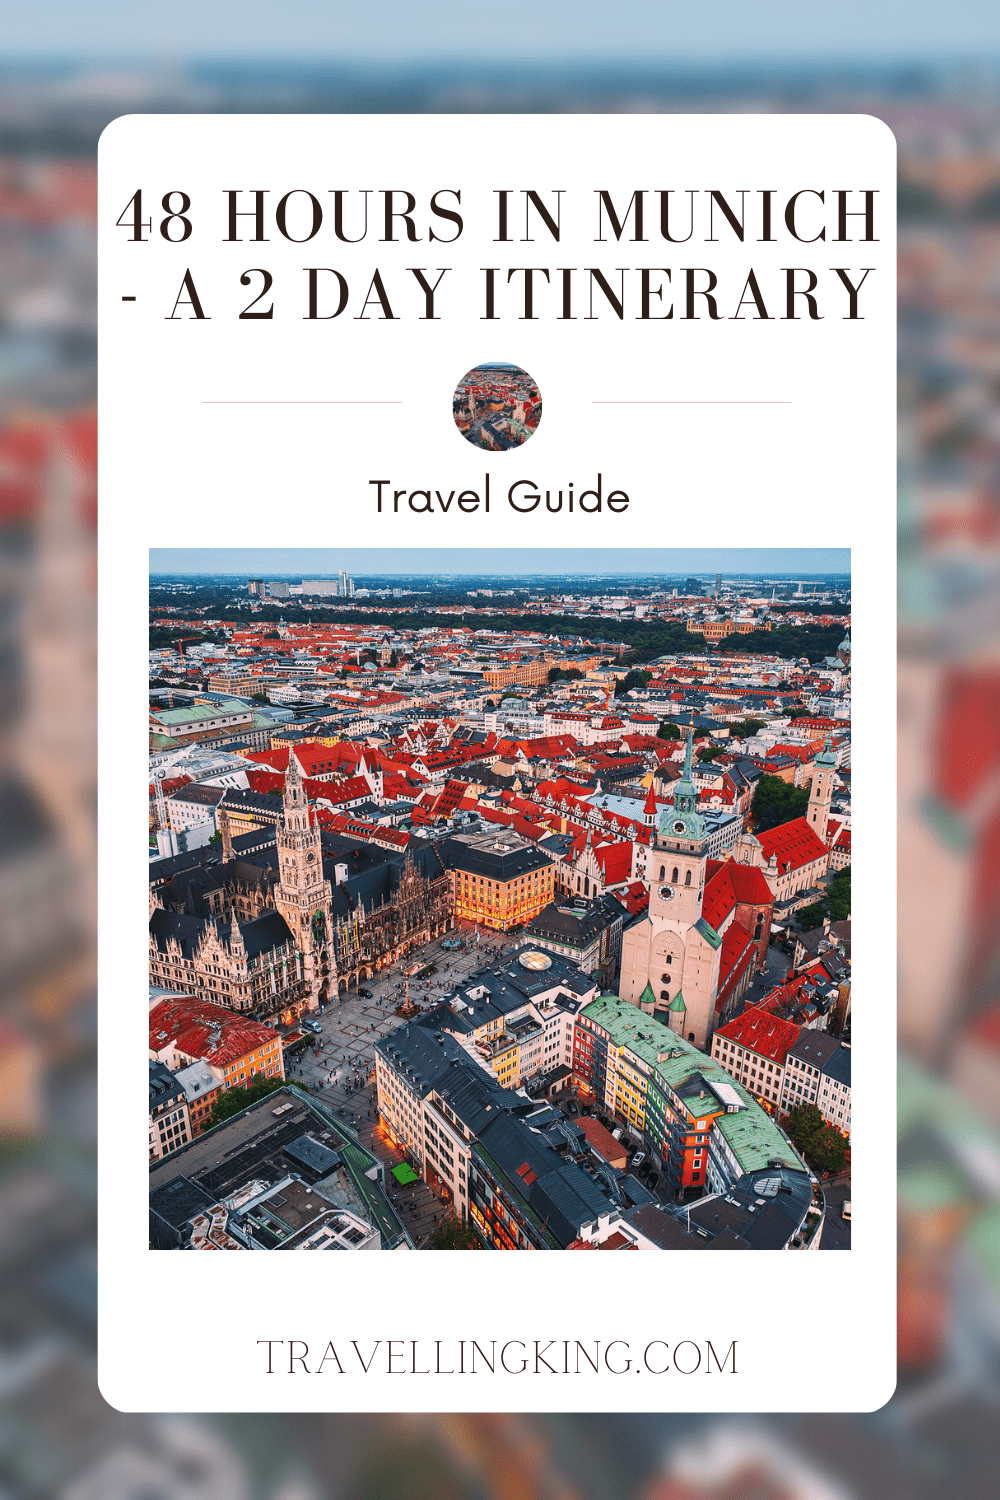 48 hours in Munich - A 2 day Itinerary